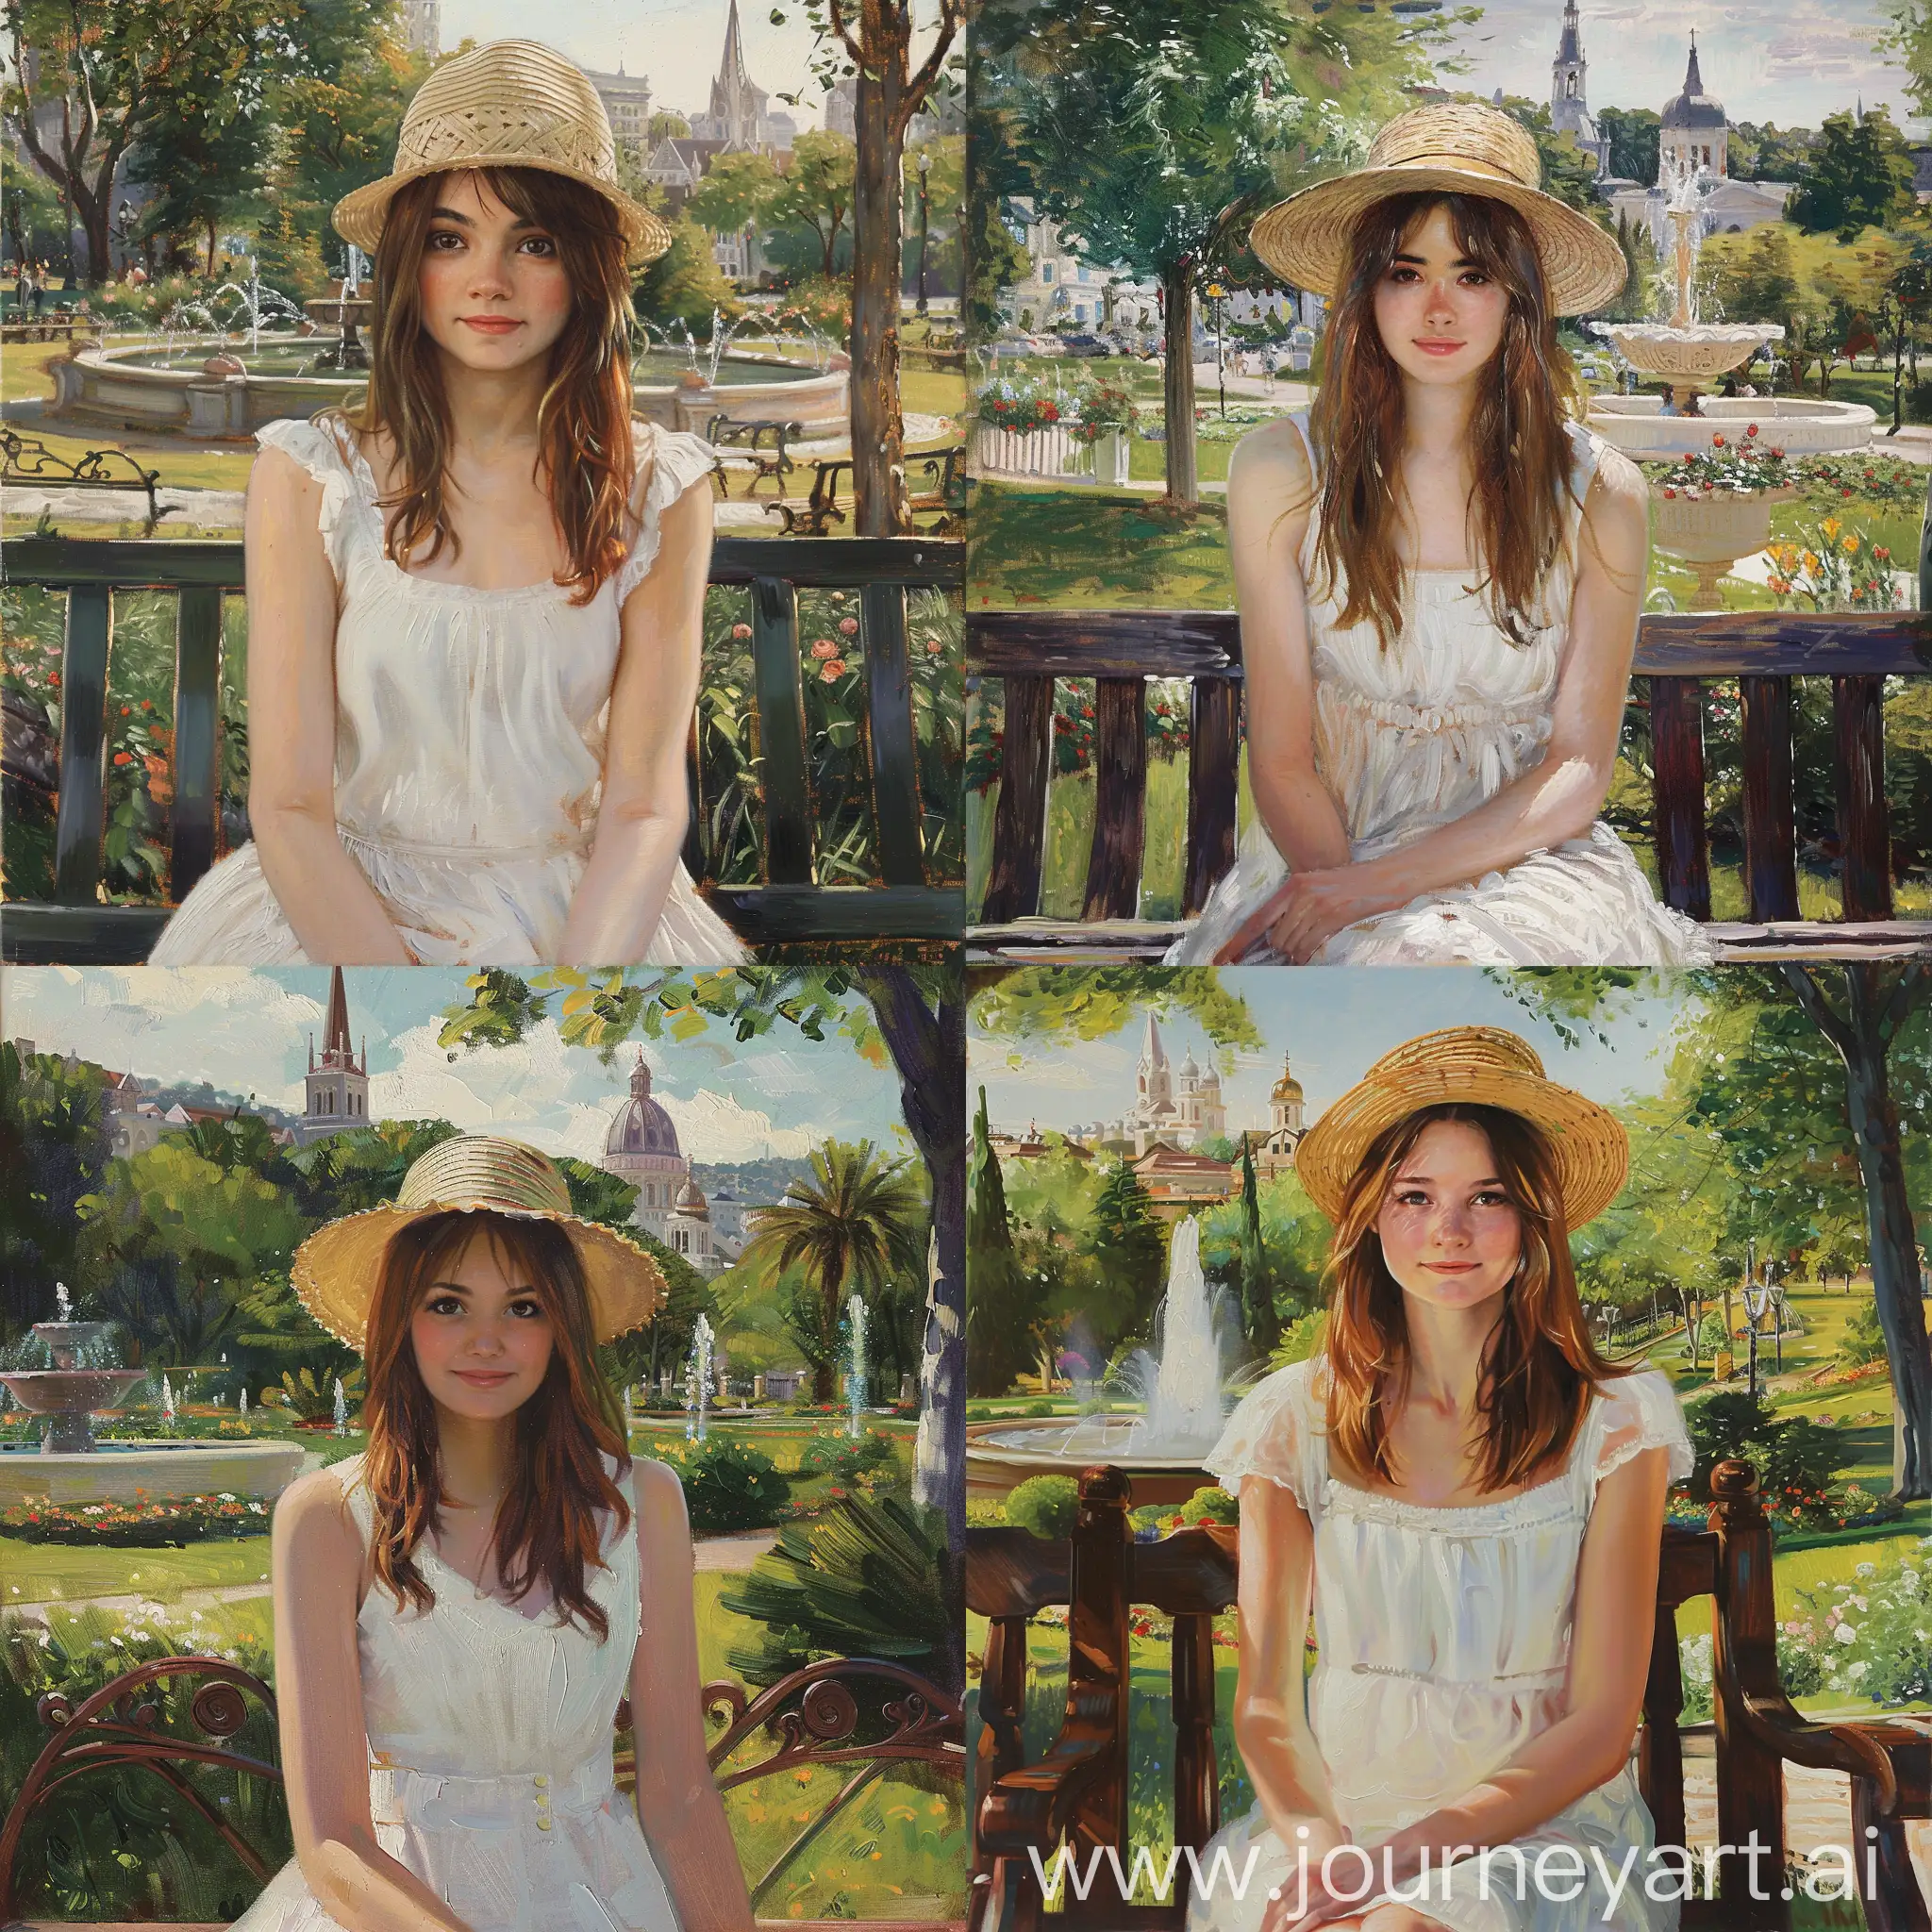 Tranquil-Park-Scene-Young-Woman-in-White-Dress-and-Straw-Hat